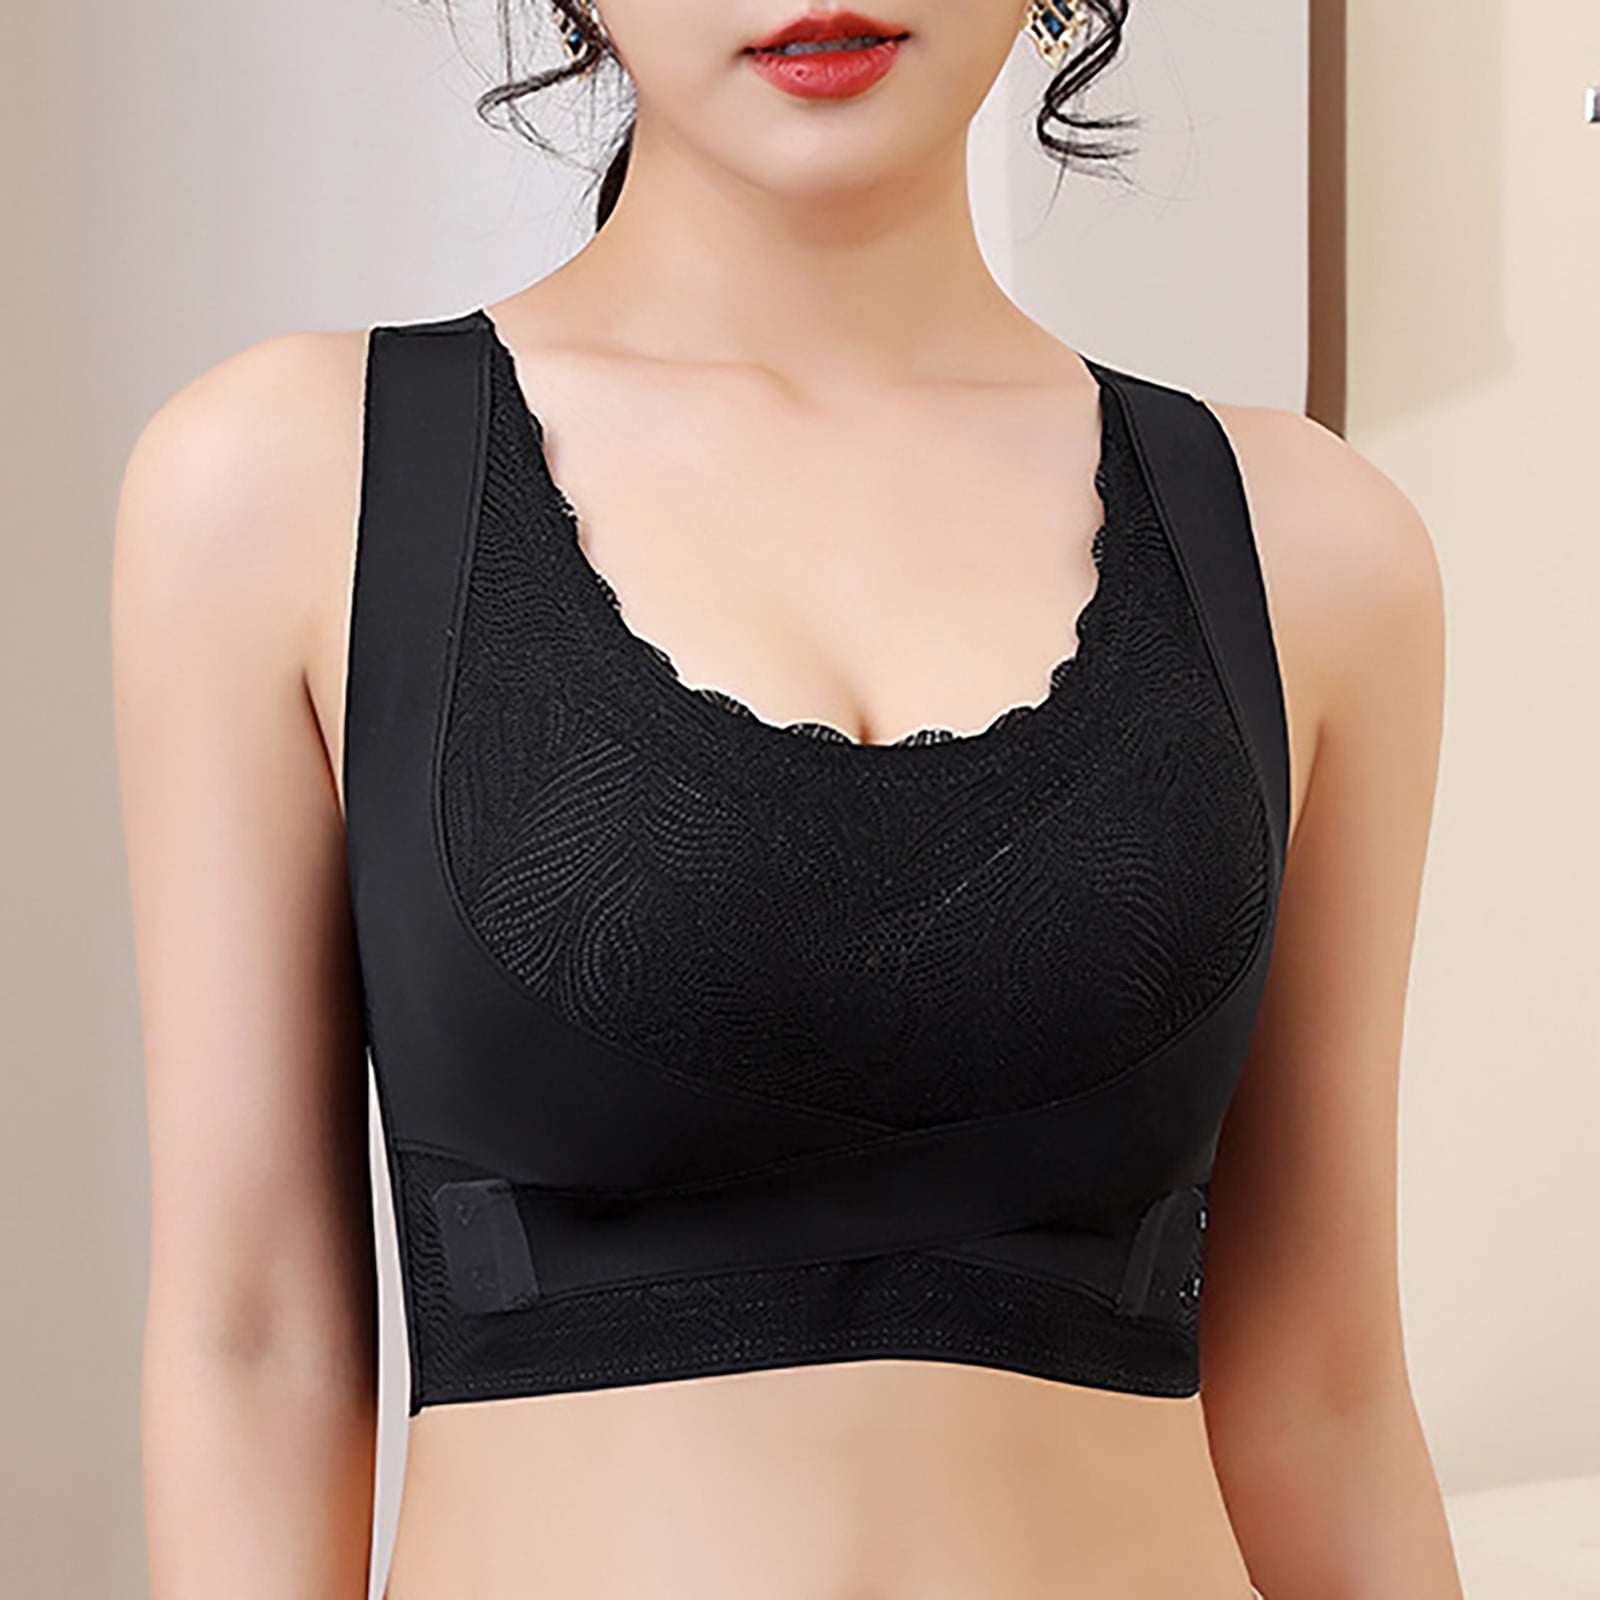 Plusform Instant Shaping Crossover Bra with Lace Cups 1685 